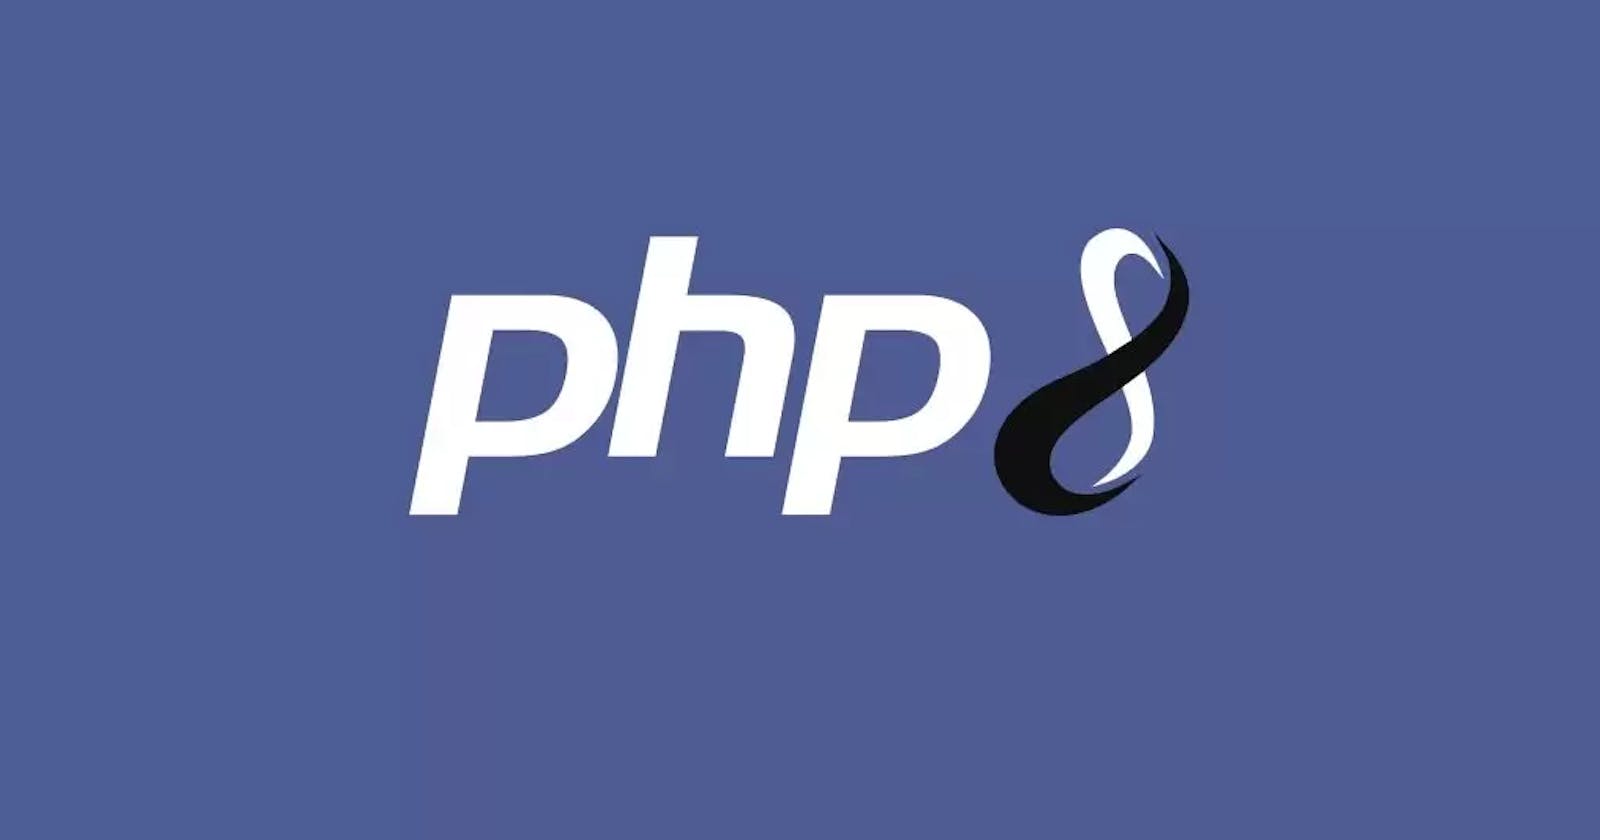 It's time to stop hating on PHP, even though it kinda deserves it.